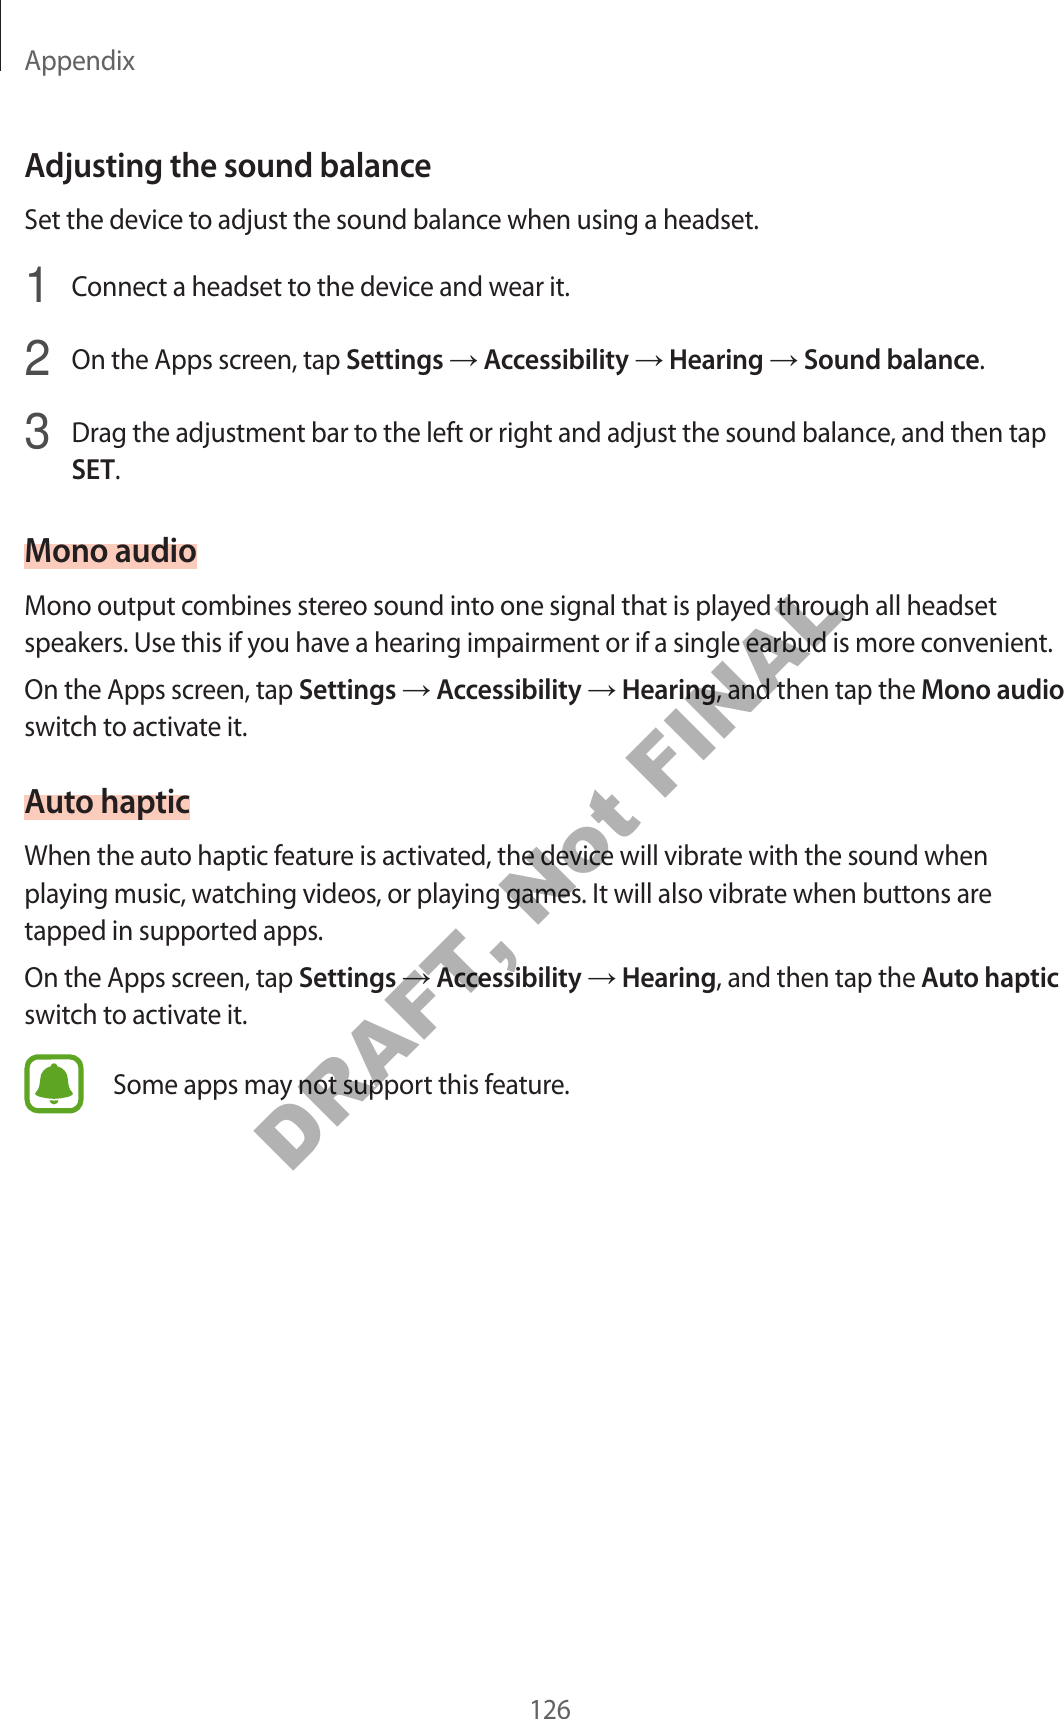 Appendix126Adjusting the sound balanceSet the device to adjust the sound balance when using a headset.1  Connect a headset to the device and wear it.2  On the Apps screen, tap Settings  Accessibility  Hearing  Sound balance.3  Drag the adjustment bar to the left or right and adjust the sound balance, and then tap SET.Mono audioMono output combines stereo sound into one signal that is played through all headset speakers. Use this if you have a hearing impairment or if a single earbud is more convenient.On the Apps screen, tap Settings  Accessibility  Hearing, and then tap the Mono audio switch to activate it.Auto hapticWhen the auto haptic feature is activated, the device will vibrate with the sound when playing music, watching videos, or playing games. It will also vibrate when buttons are tapped in supported apps.On the Apps screen, tap Settings  Accessibility  Hearing, and then tap the Auto haptic switch to activate it.Some apps may not support this feature.DRAFT, Not FINAL